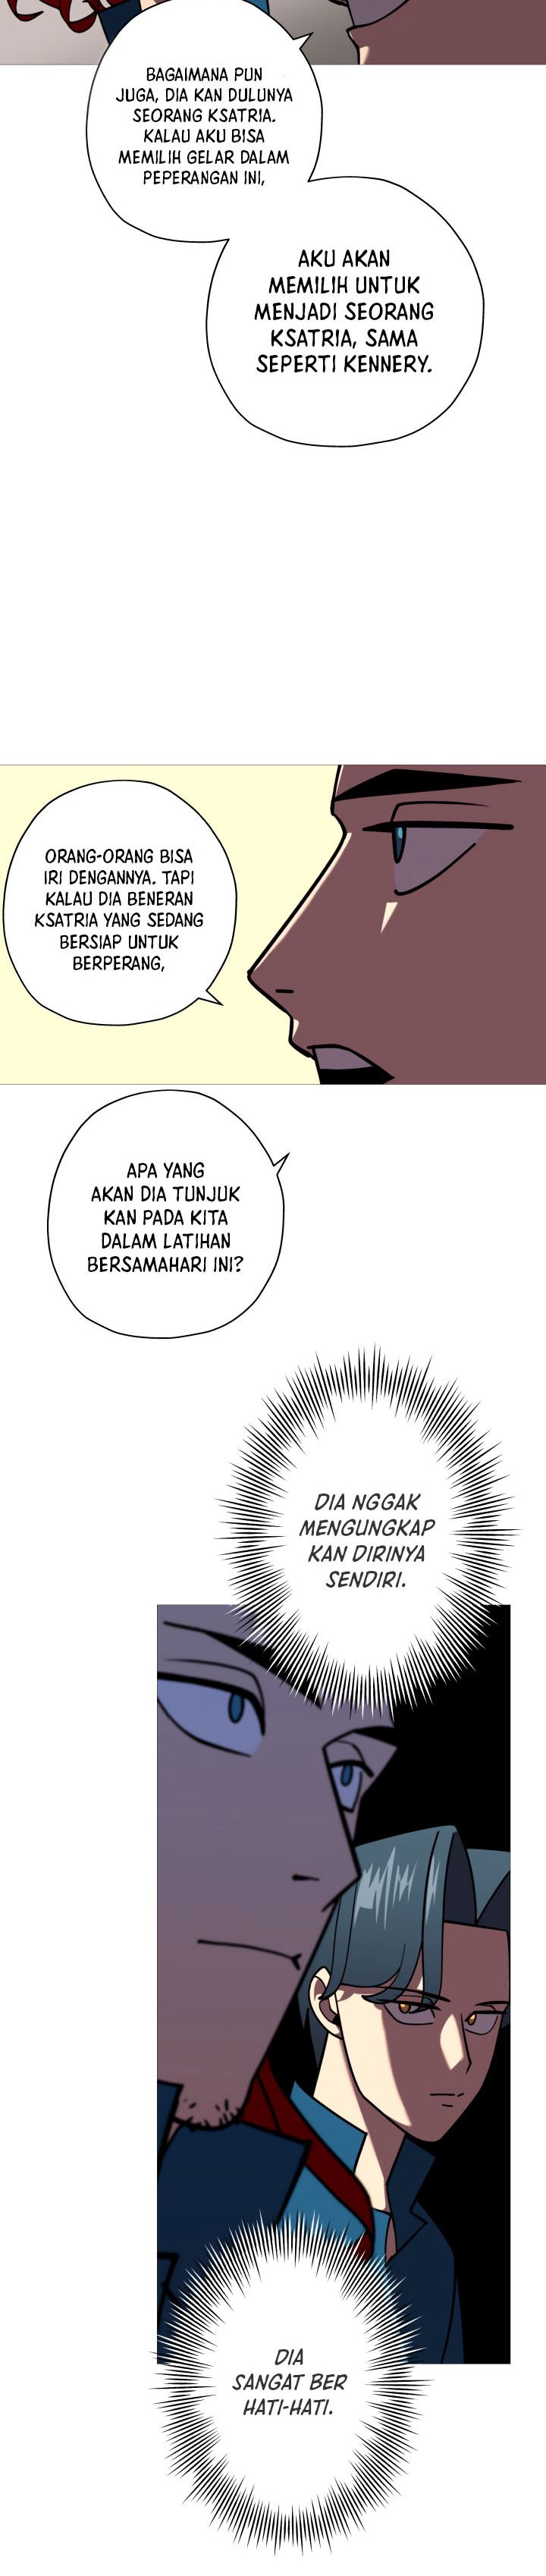 Dilarang COPAS - situs resmi www.mangacanblog.com - Komik the story of a low rank soldier becoming a monarch 013 - chapter 13 14 Indonesia the story of a low rank soldier becoming a monarch 013 - chapter 13 Terbaru 9|Baca Manga Komik Indonesia|Mangacan